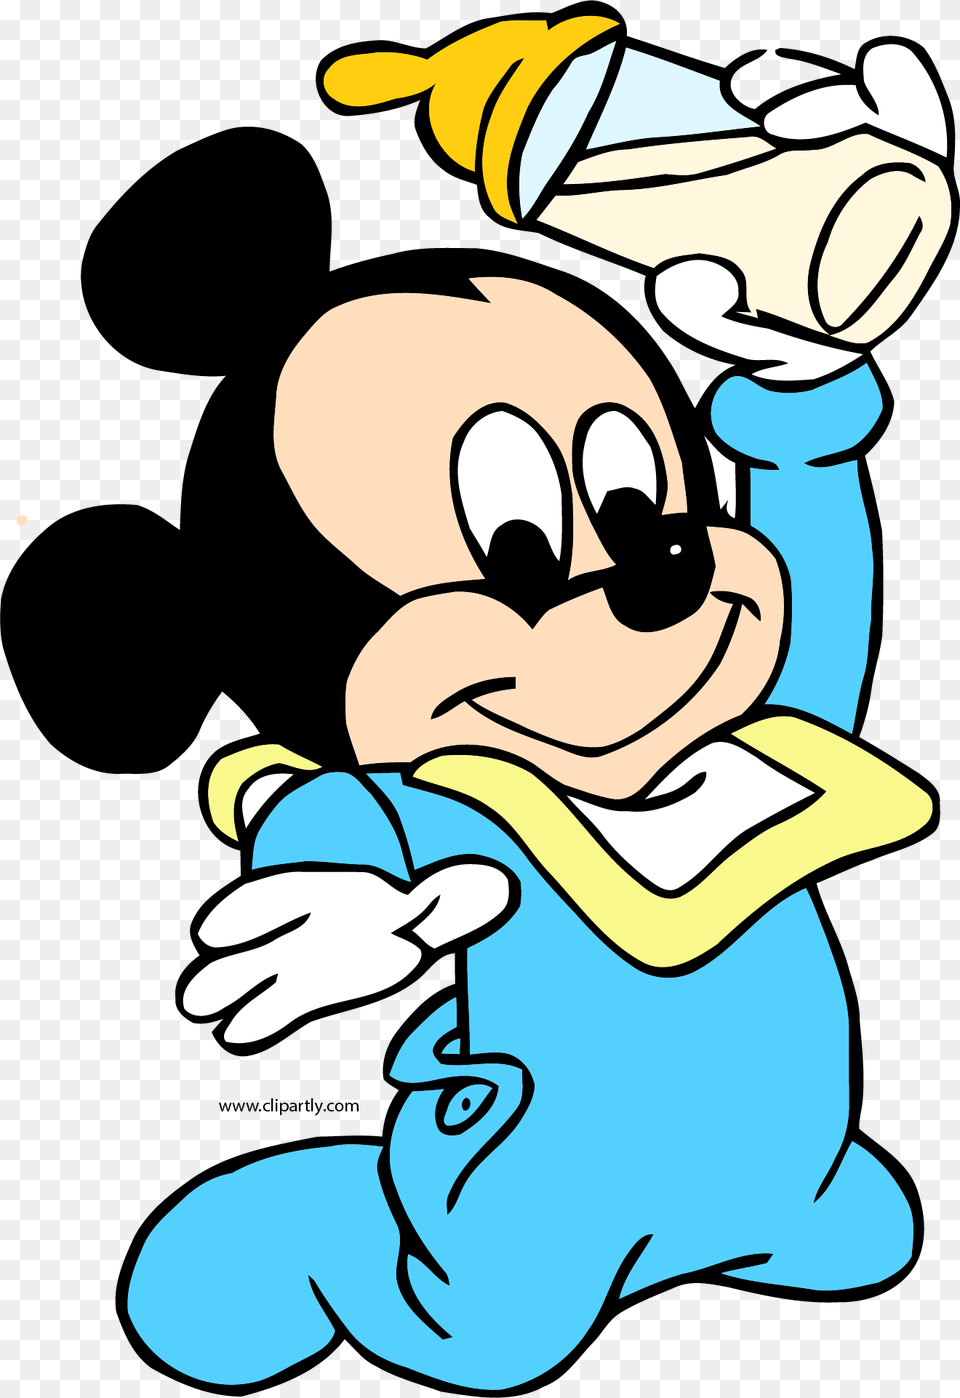 Mickey Mouse Minnie Mouse Clip Art Image Openclipart, Cartoon Png